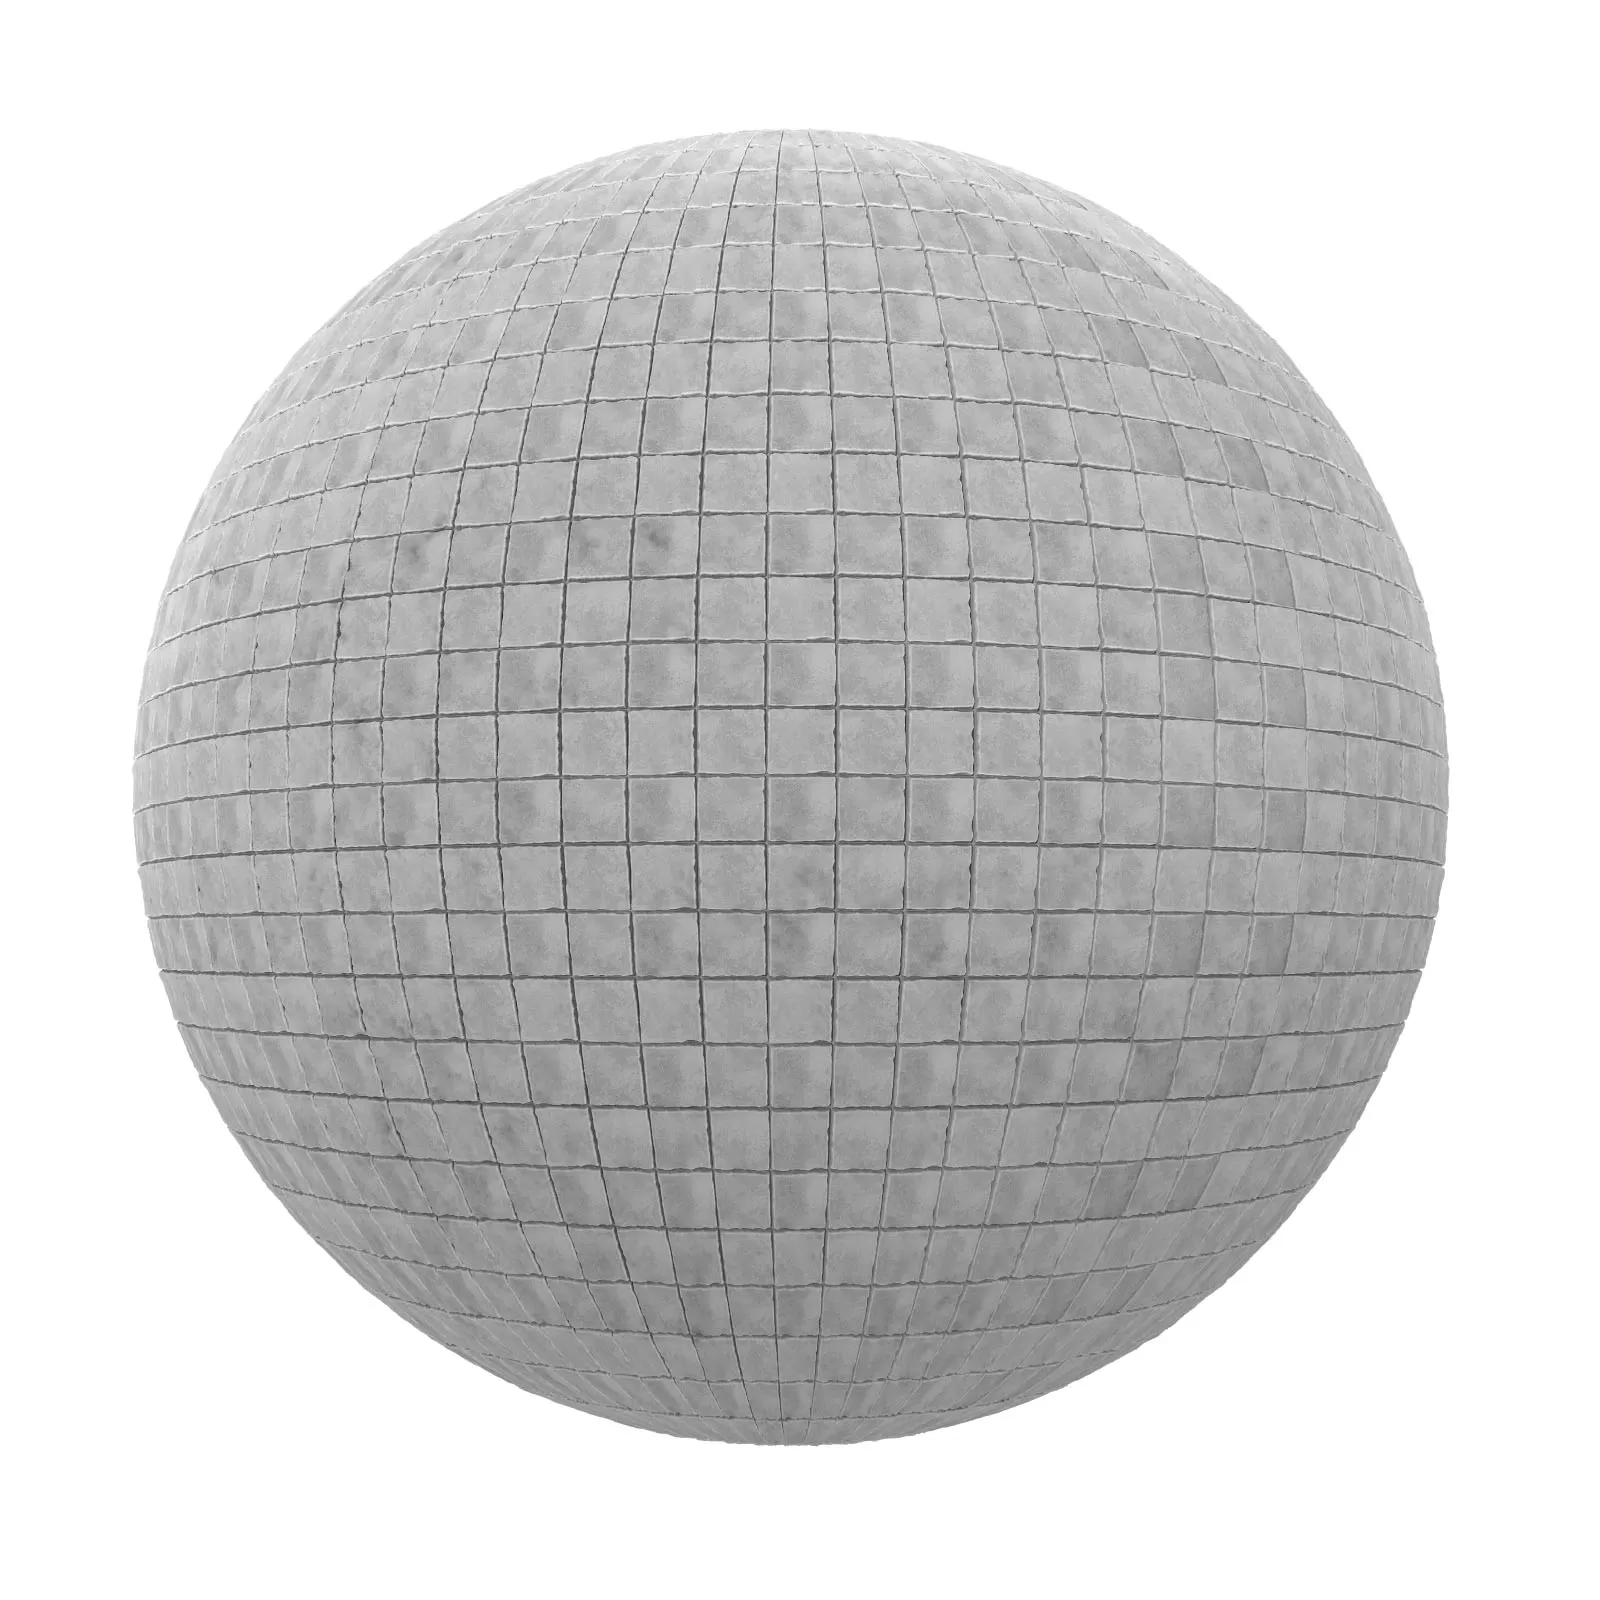 PBR CGAXIS TEXTURES – PAVEMENTS – Grey Tile Pavement